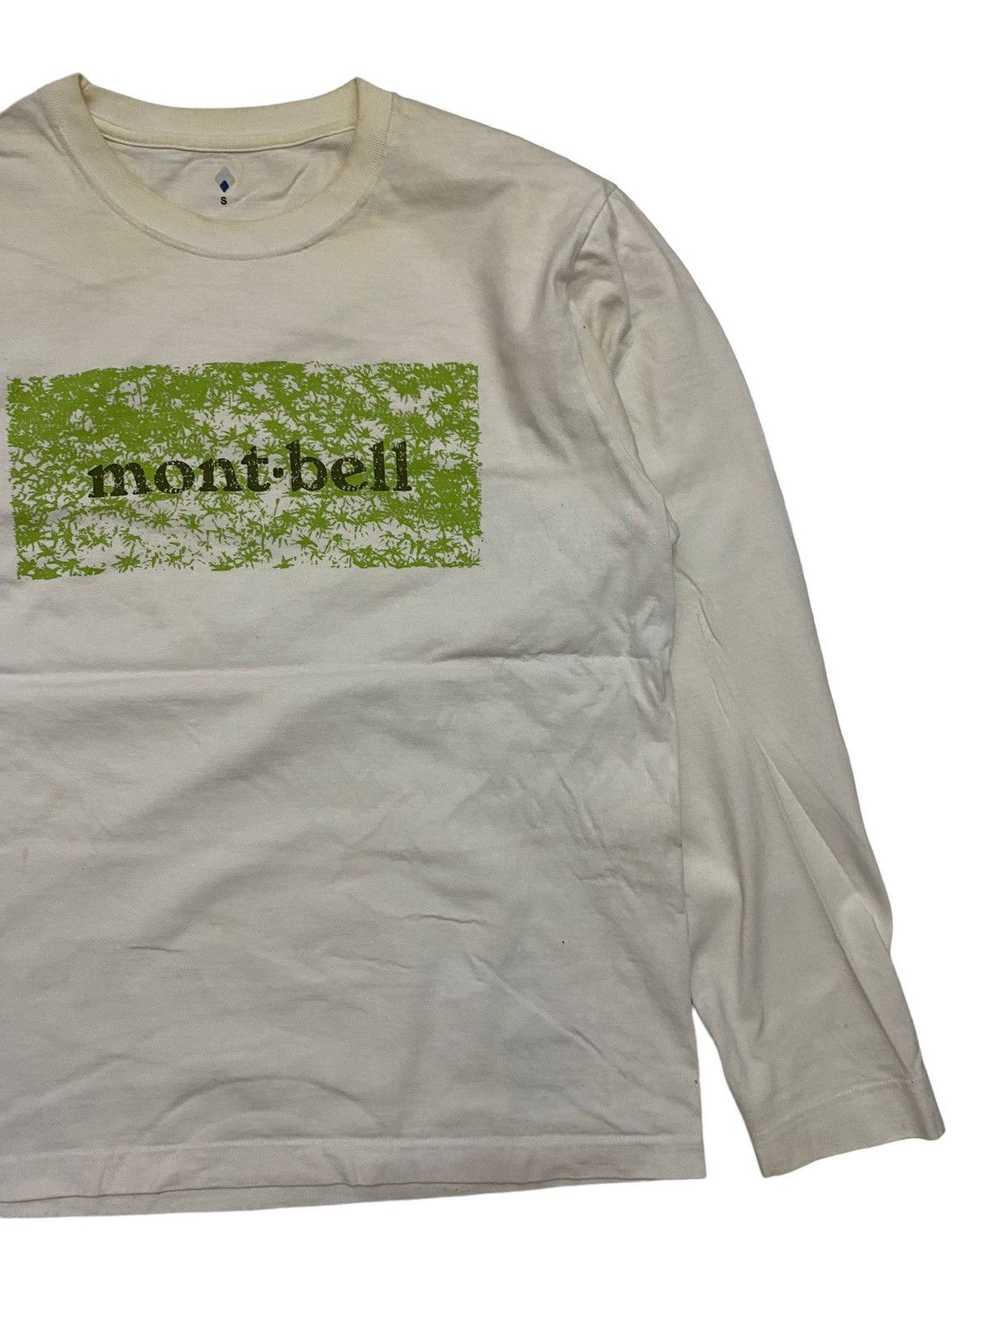 Japanese Brand × Montbell × Streetwear Montbell B… - image 3